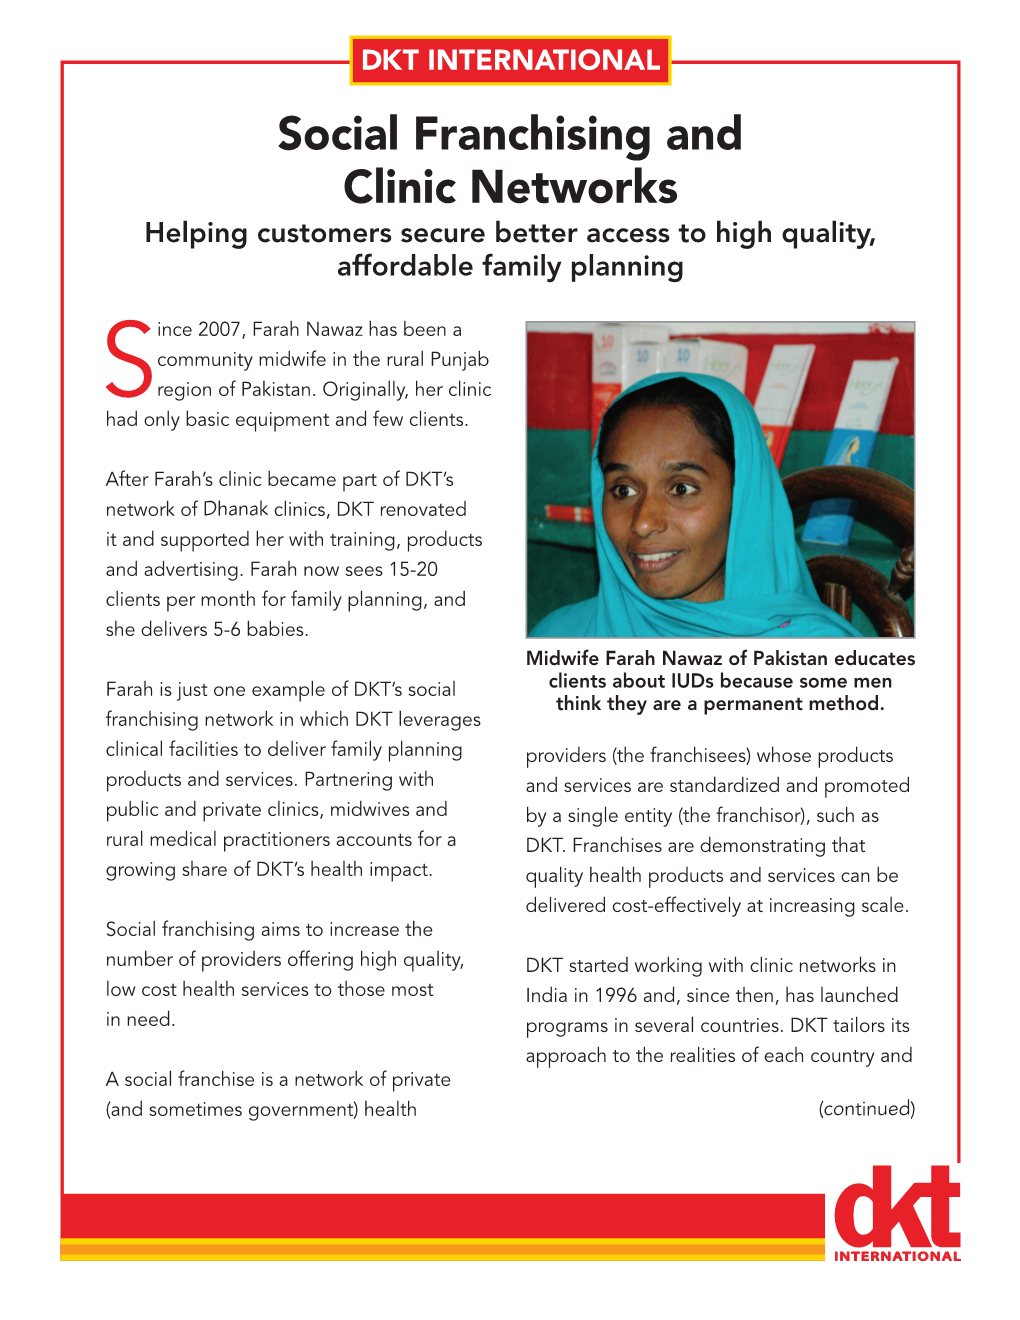 DKT INTERNATIONAL Social Franchising and Clinic Networks Helping Customers Secure Better Access to High Quality, Affordable Family Planning